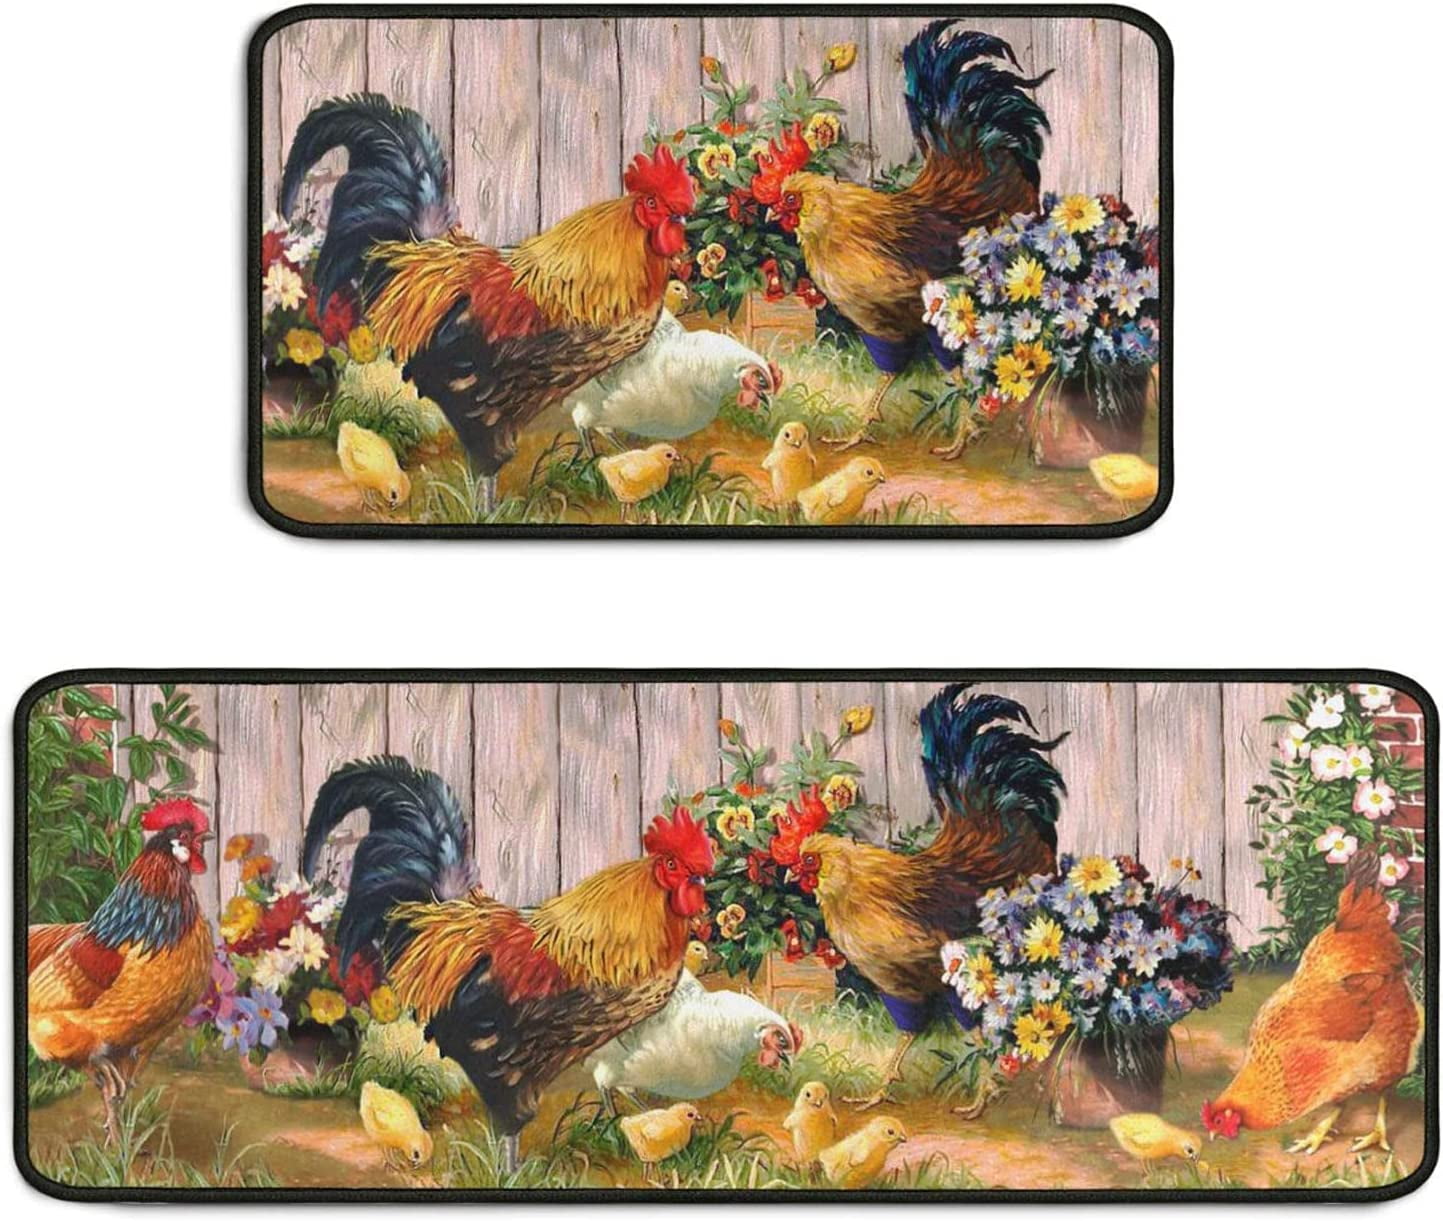 Rooster Kitchen Rugs Set 2Pcs Non Slip Kitchen Floor Rug and Mat ...